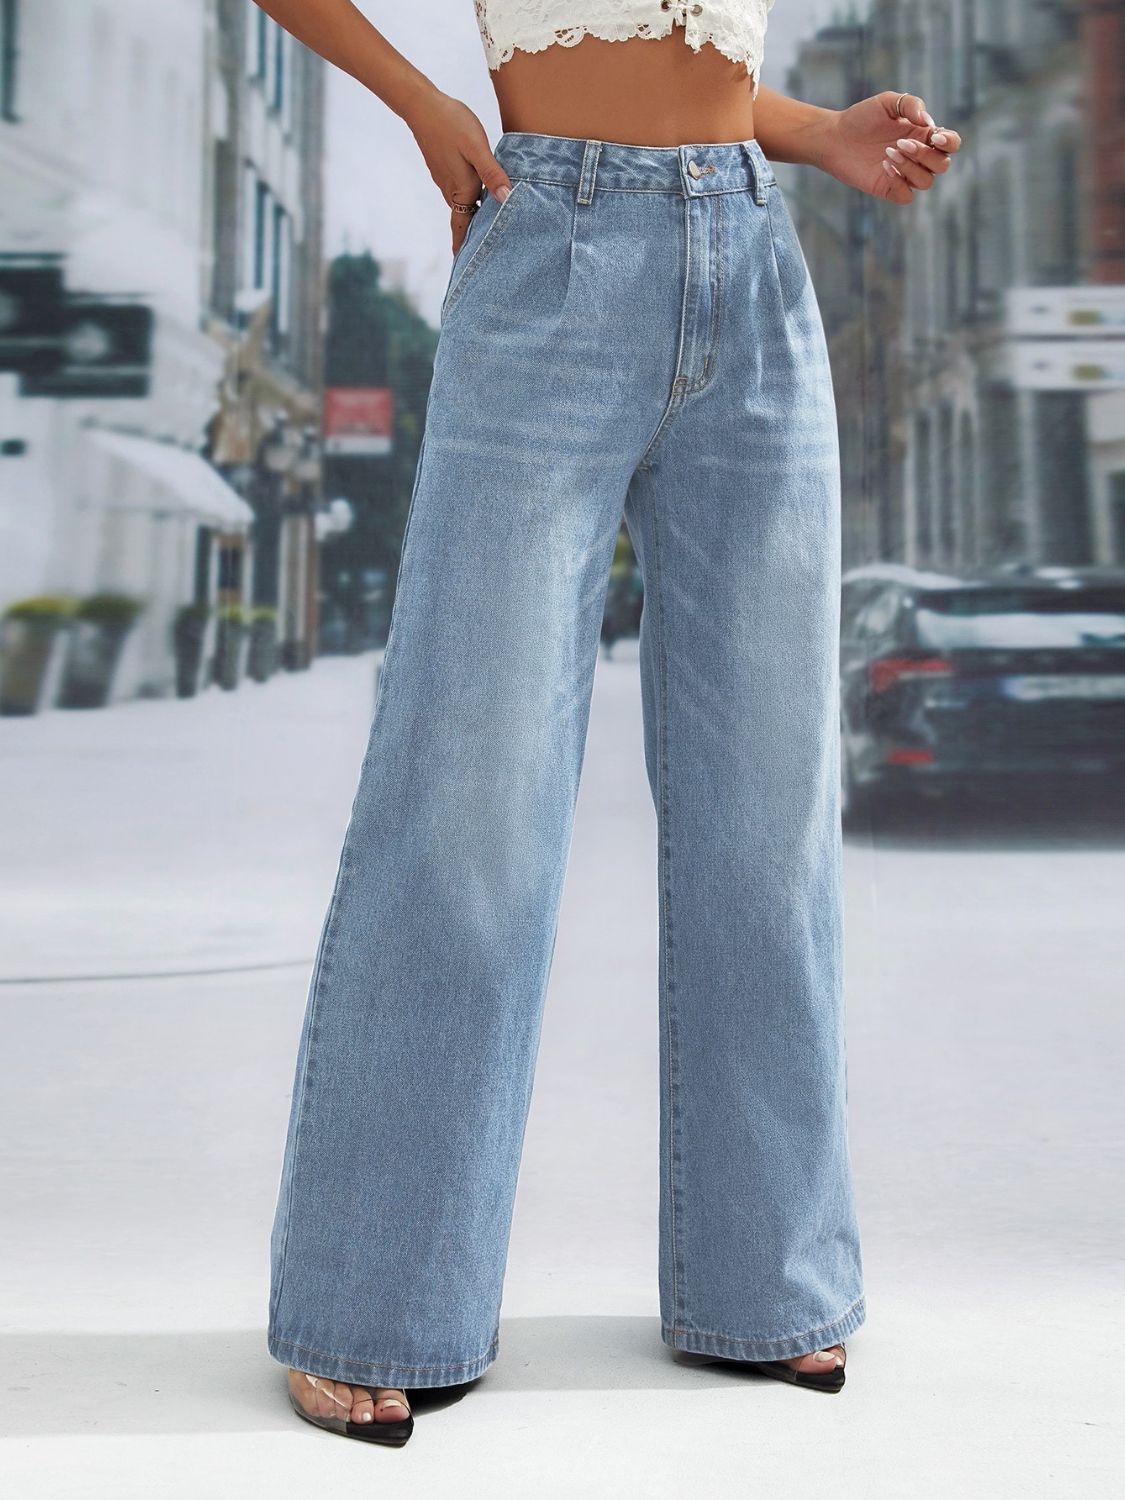 Gray Wide Leg Jeans with Pockets Sentient Beauty Fashions Apparel &amp; Accessories